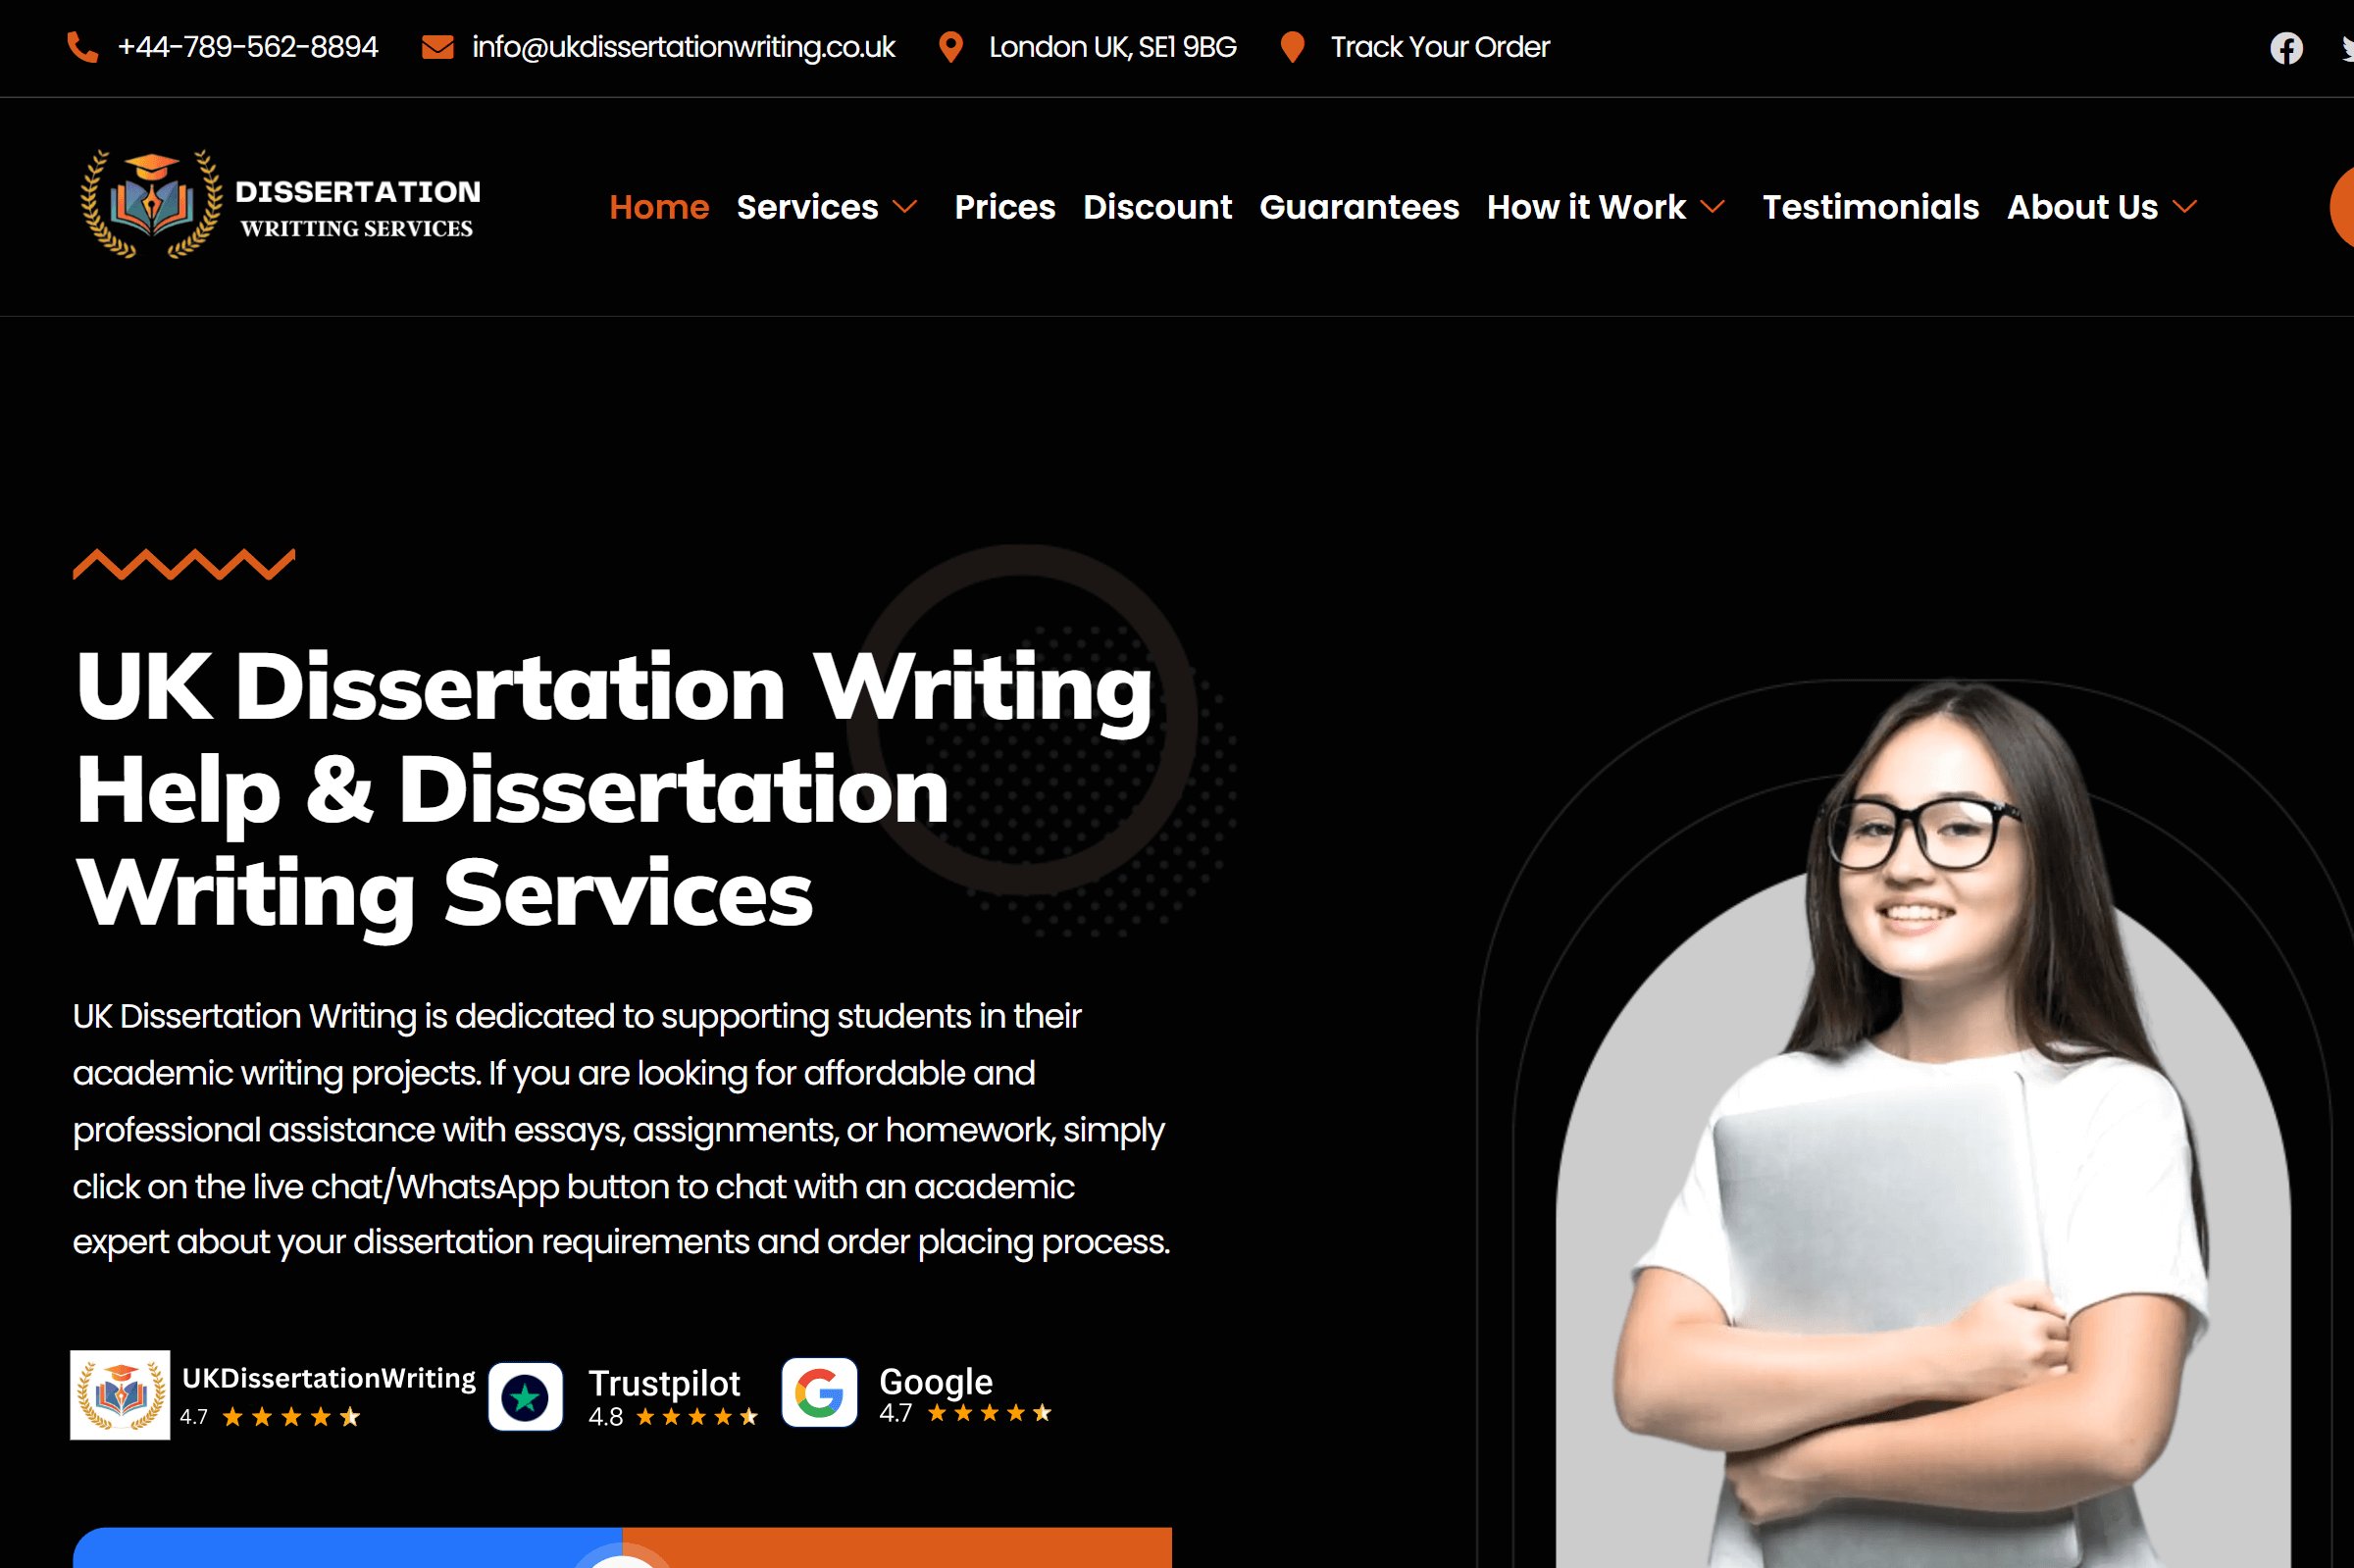 UK Dissertation Writing on ReadSomeReviews